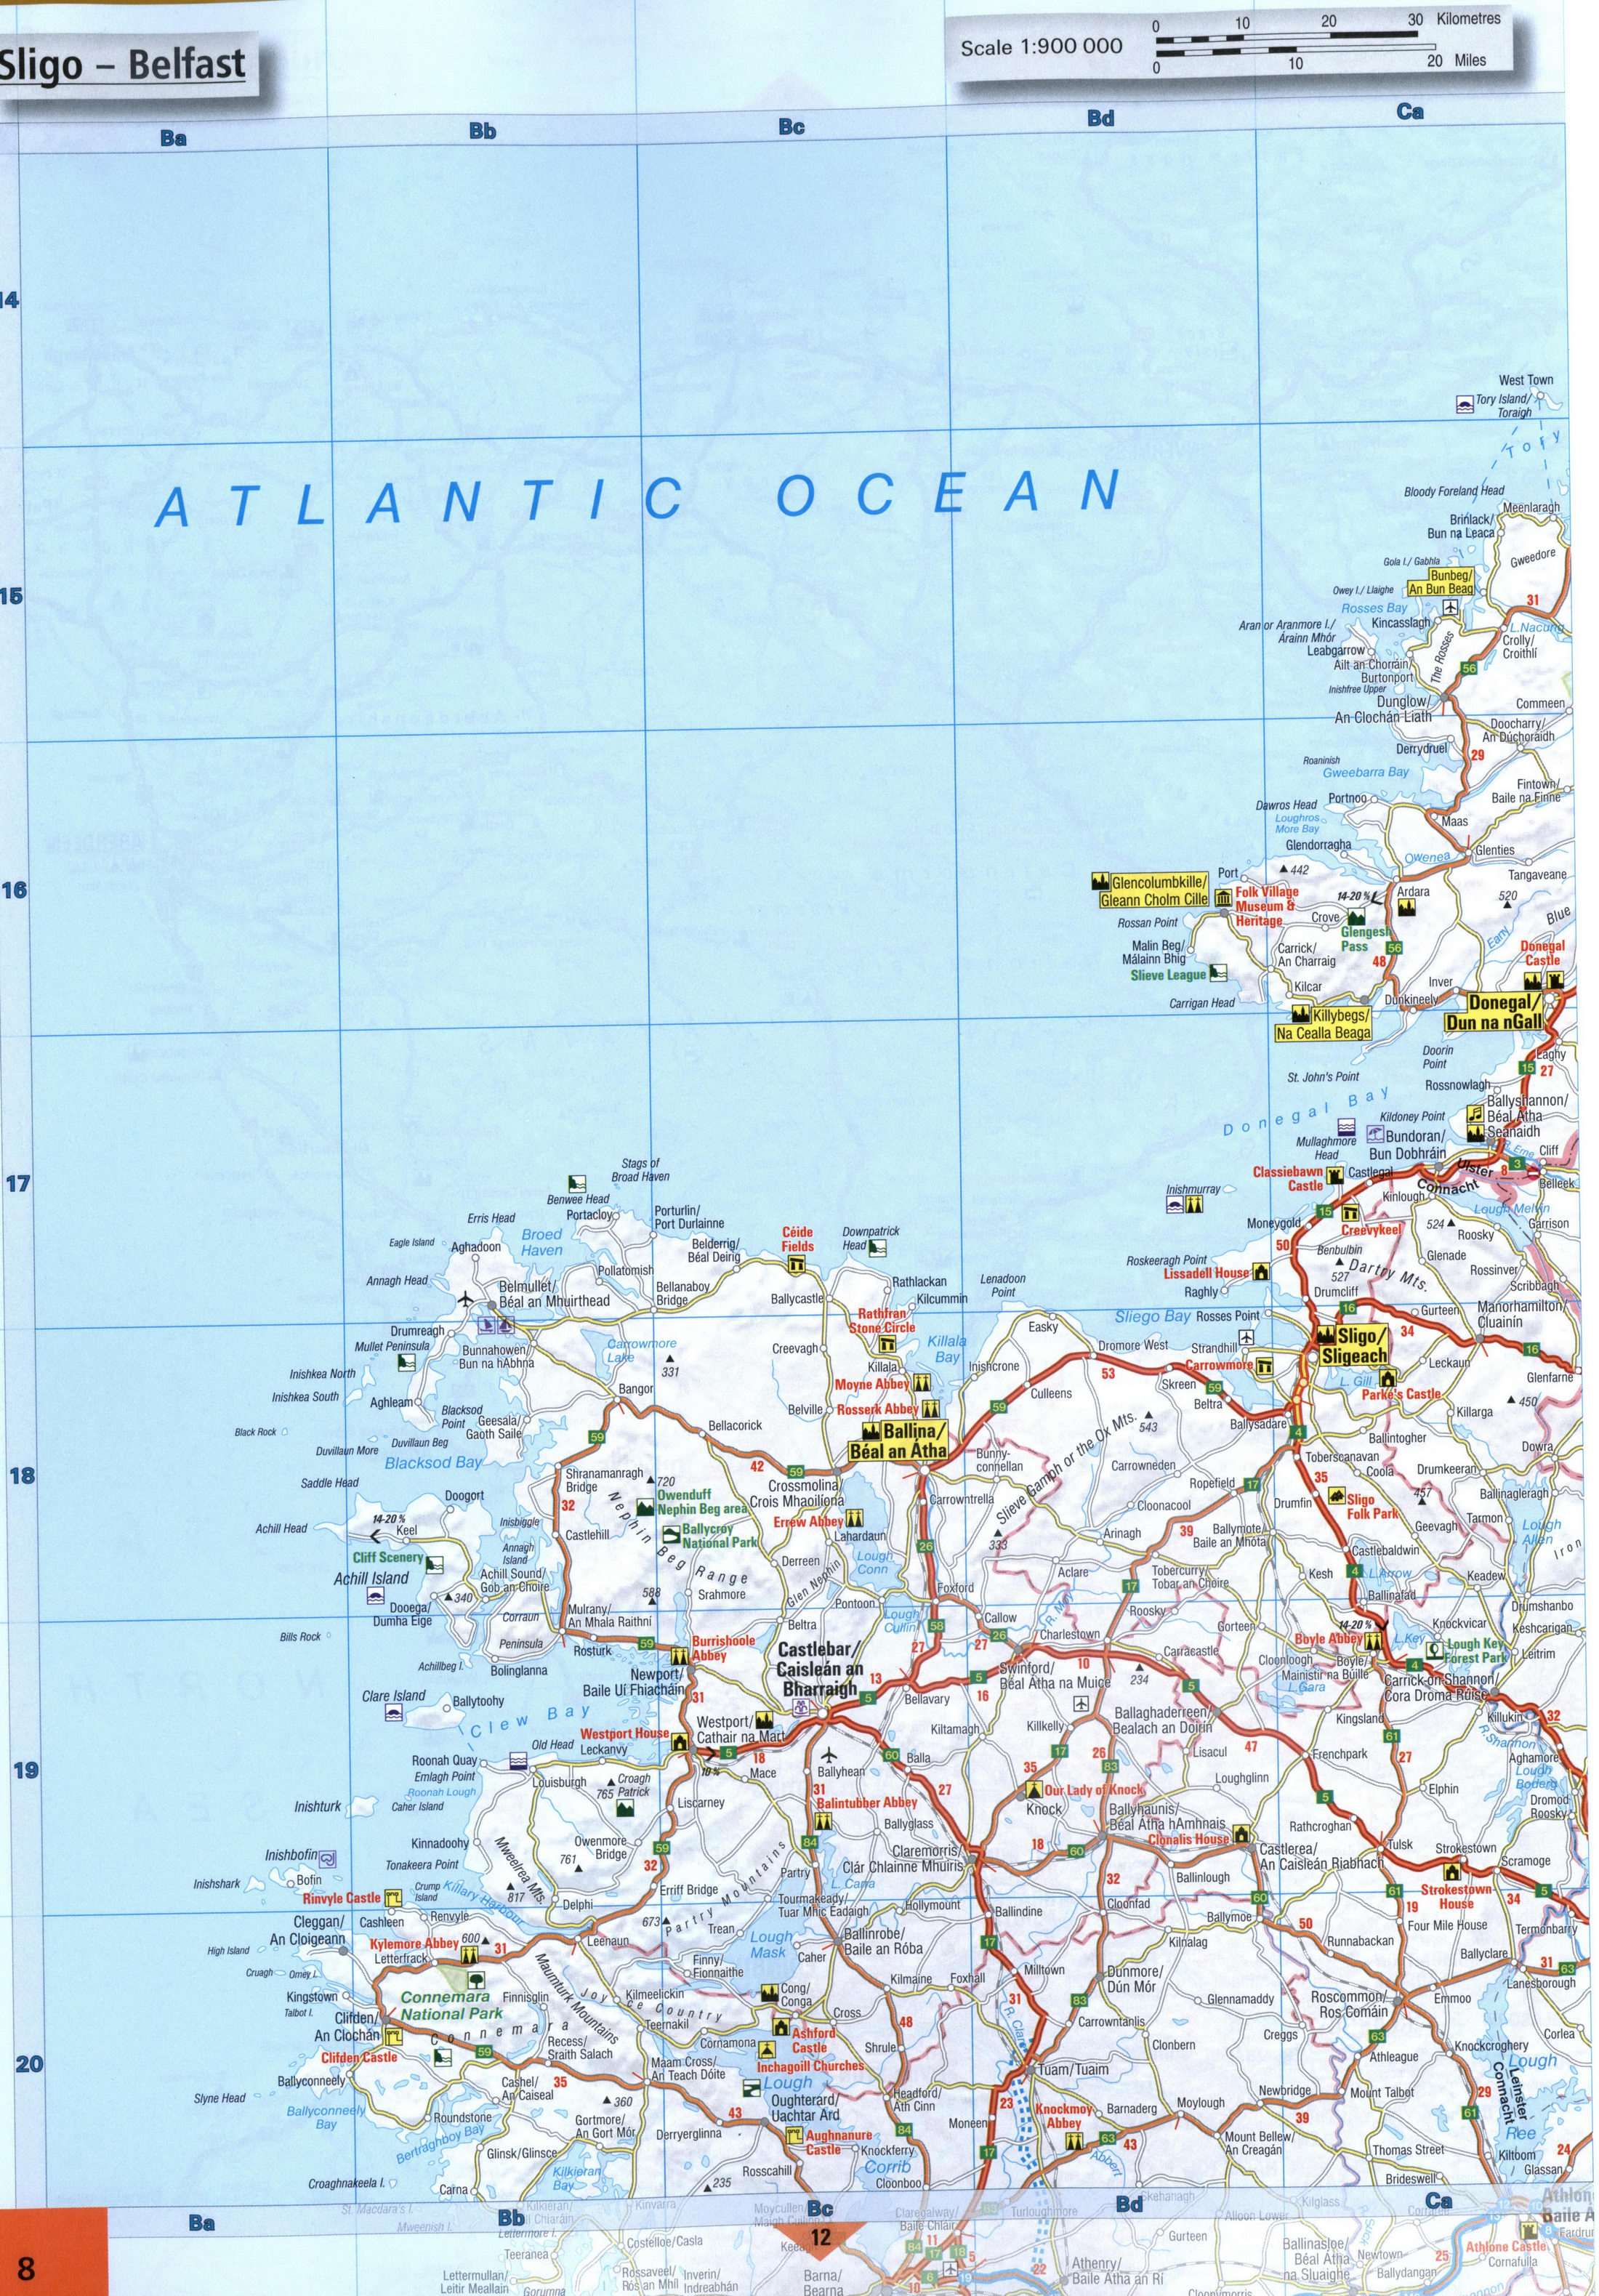 map of Donegal Bay and Clew Bay in Ireland